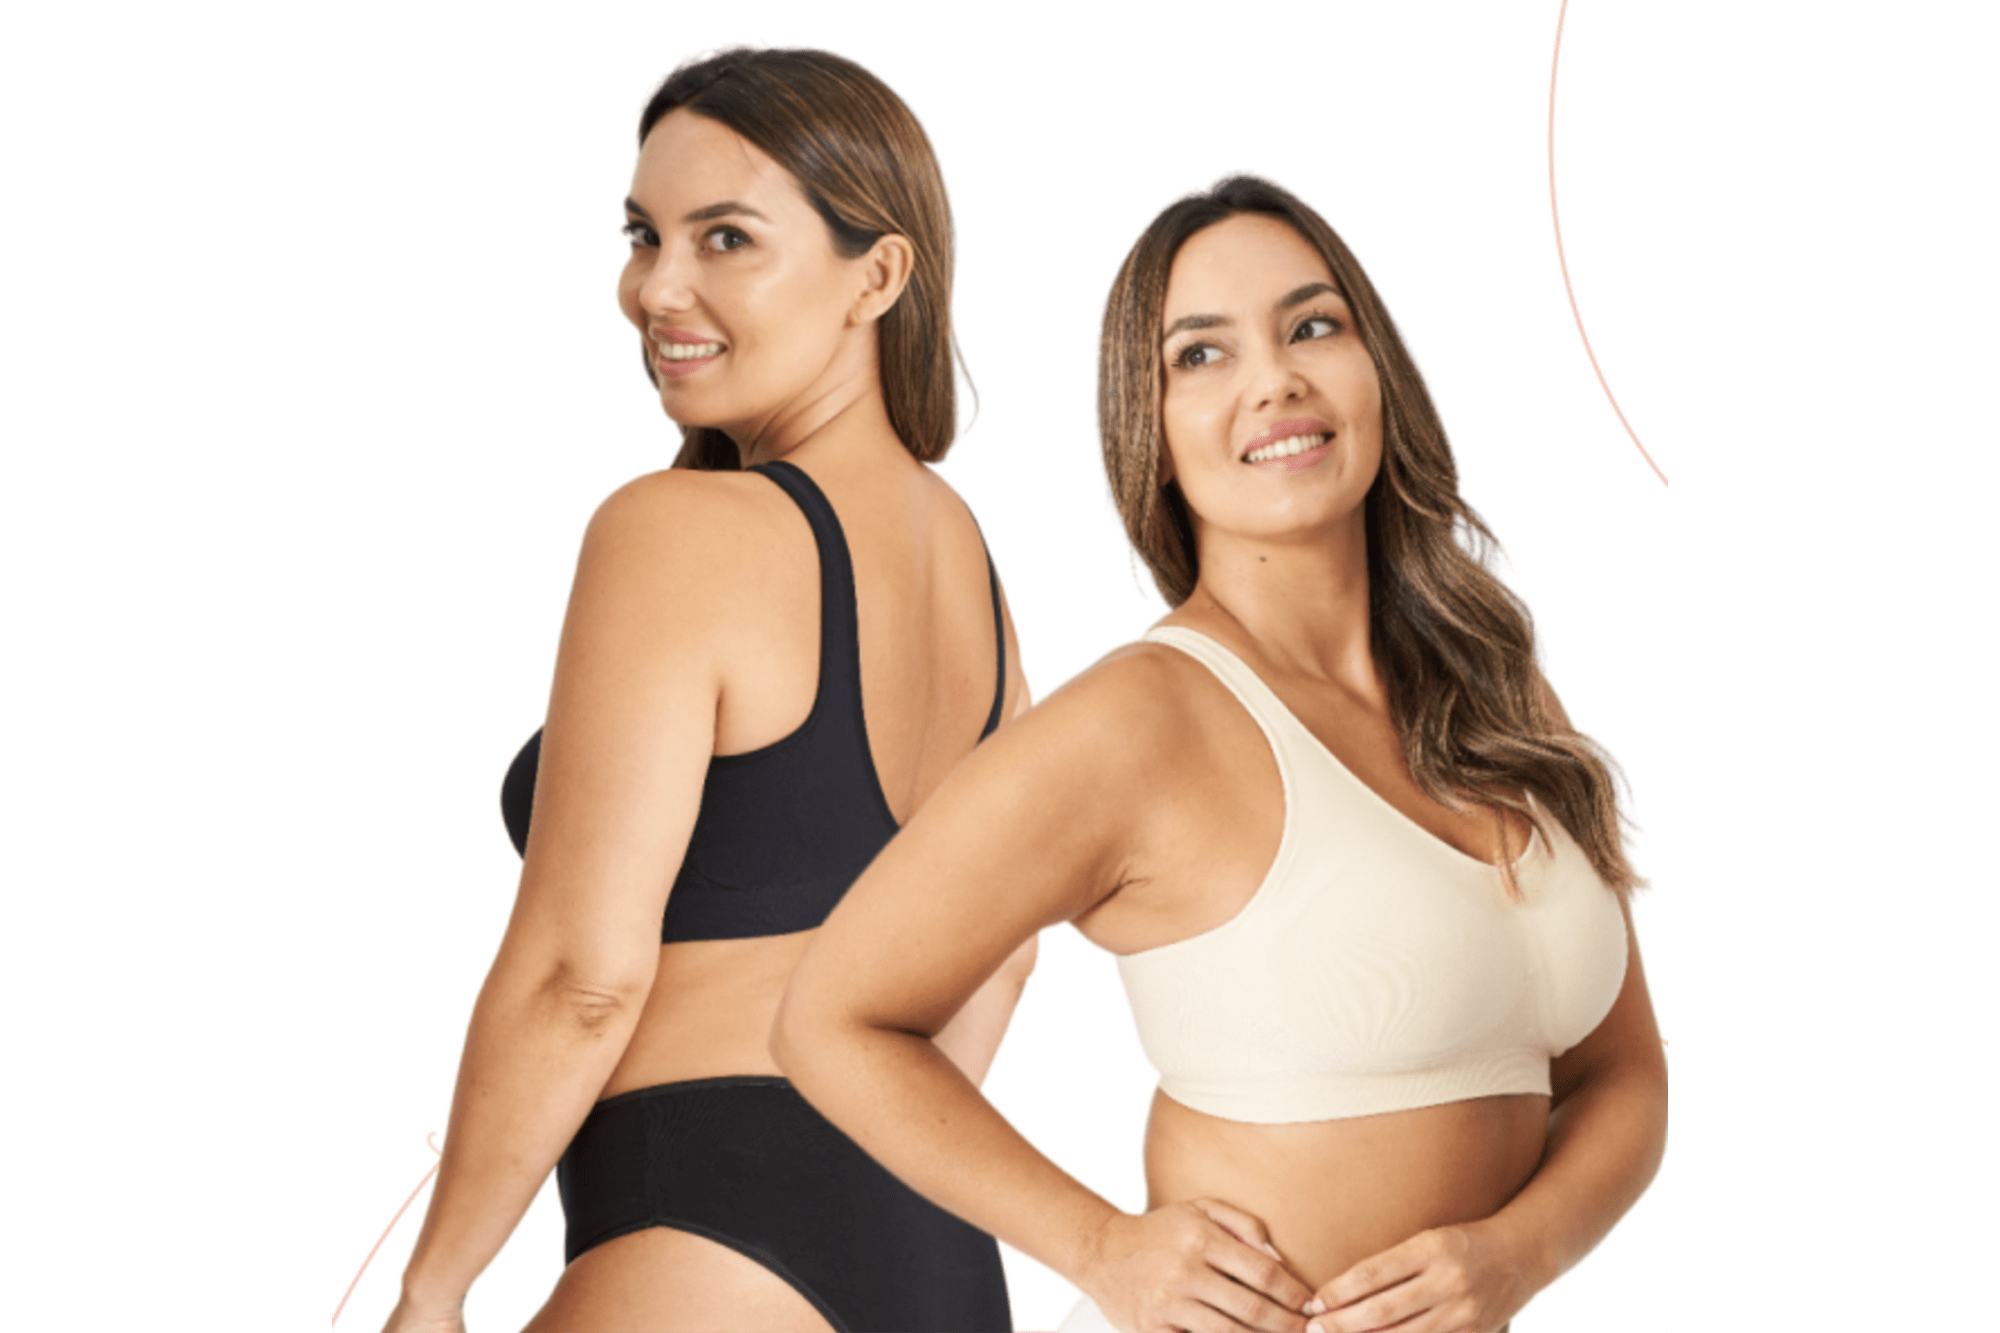 This Shapermint Compression Bra Is Already on Sale for Prime Day